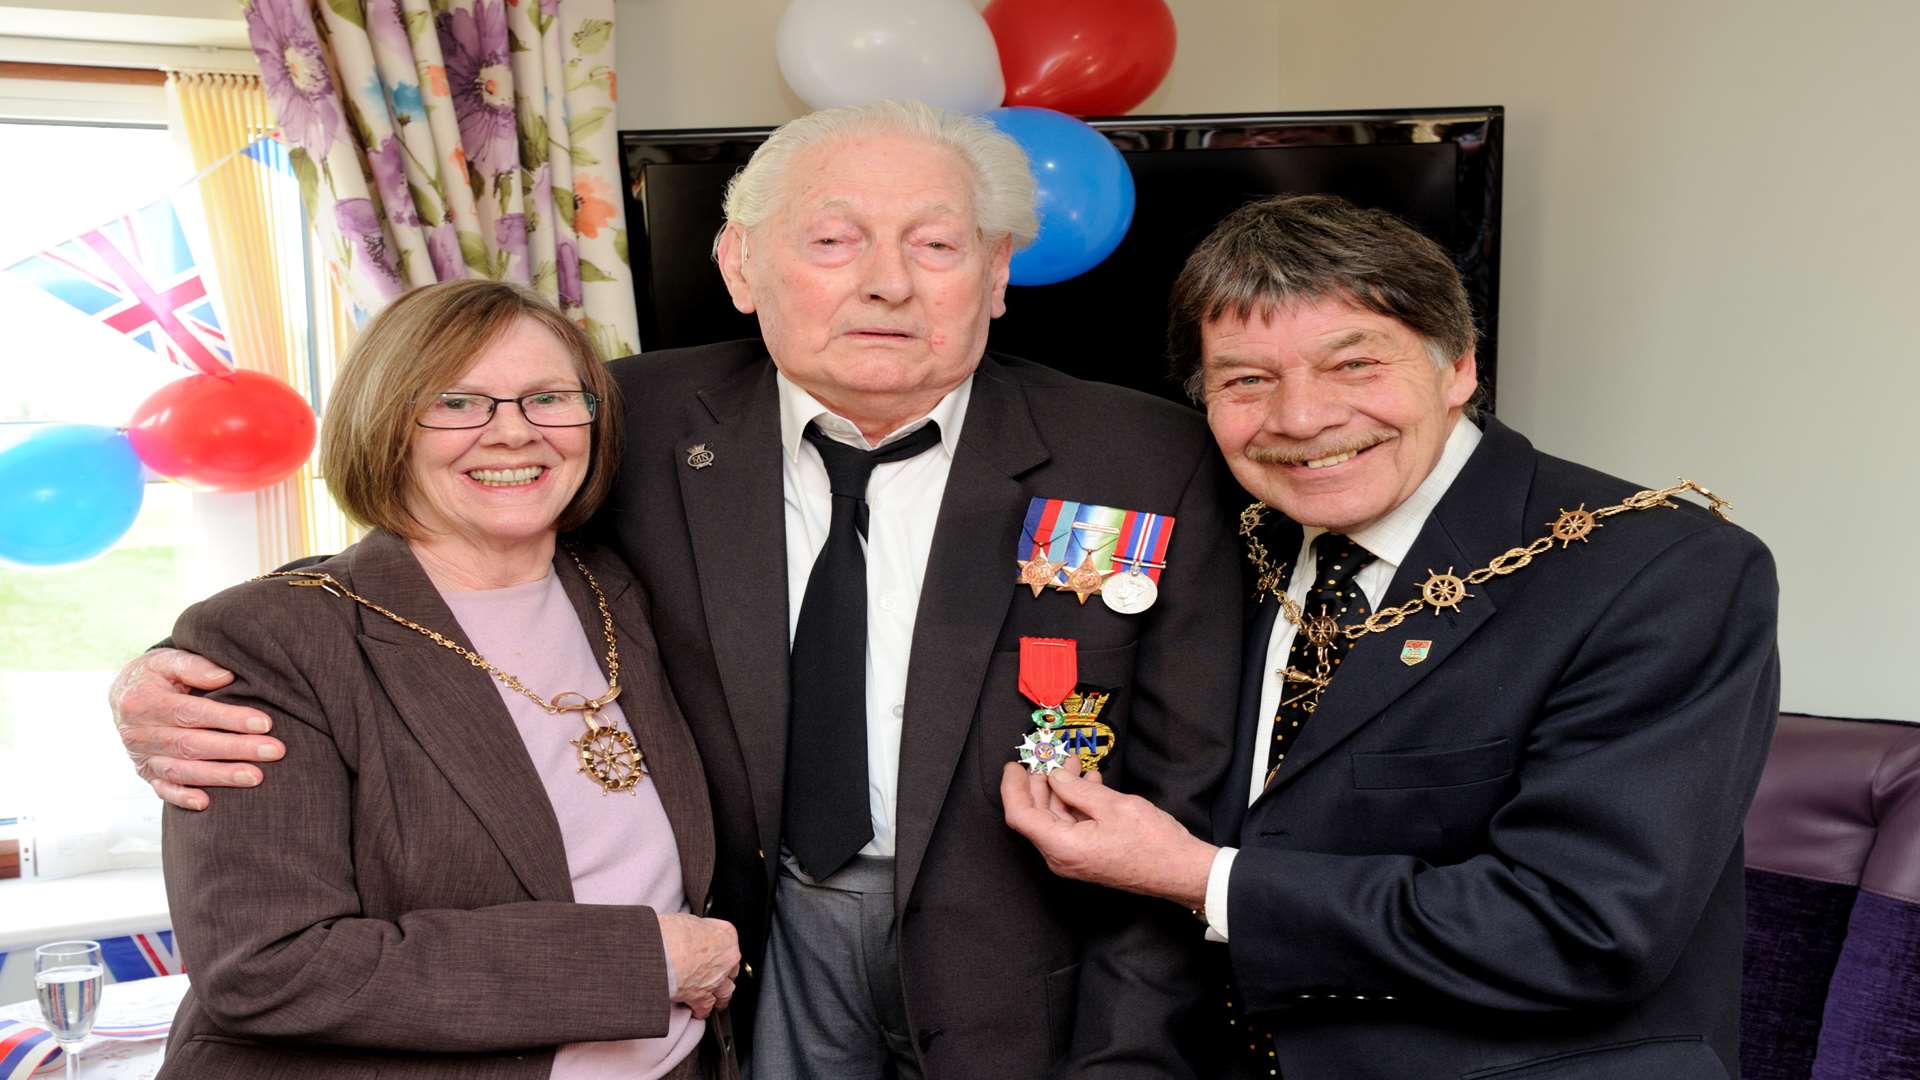 John (Jack) Roots presented with the legion of honour. Jack with the Gravesham Mayoress and Mayor Fiona Strike & Mike Wenban.